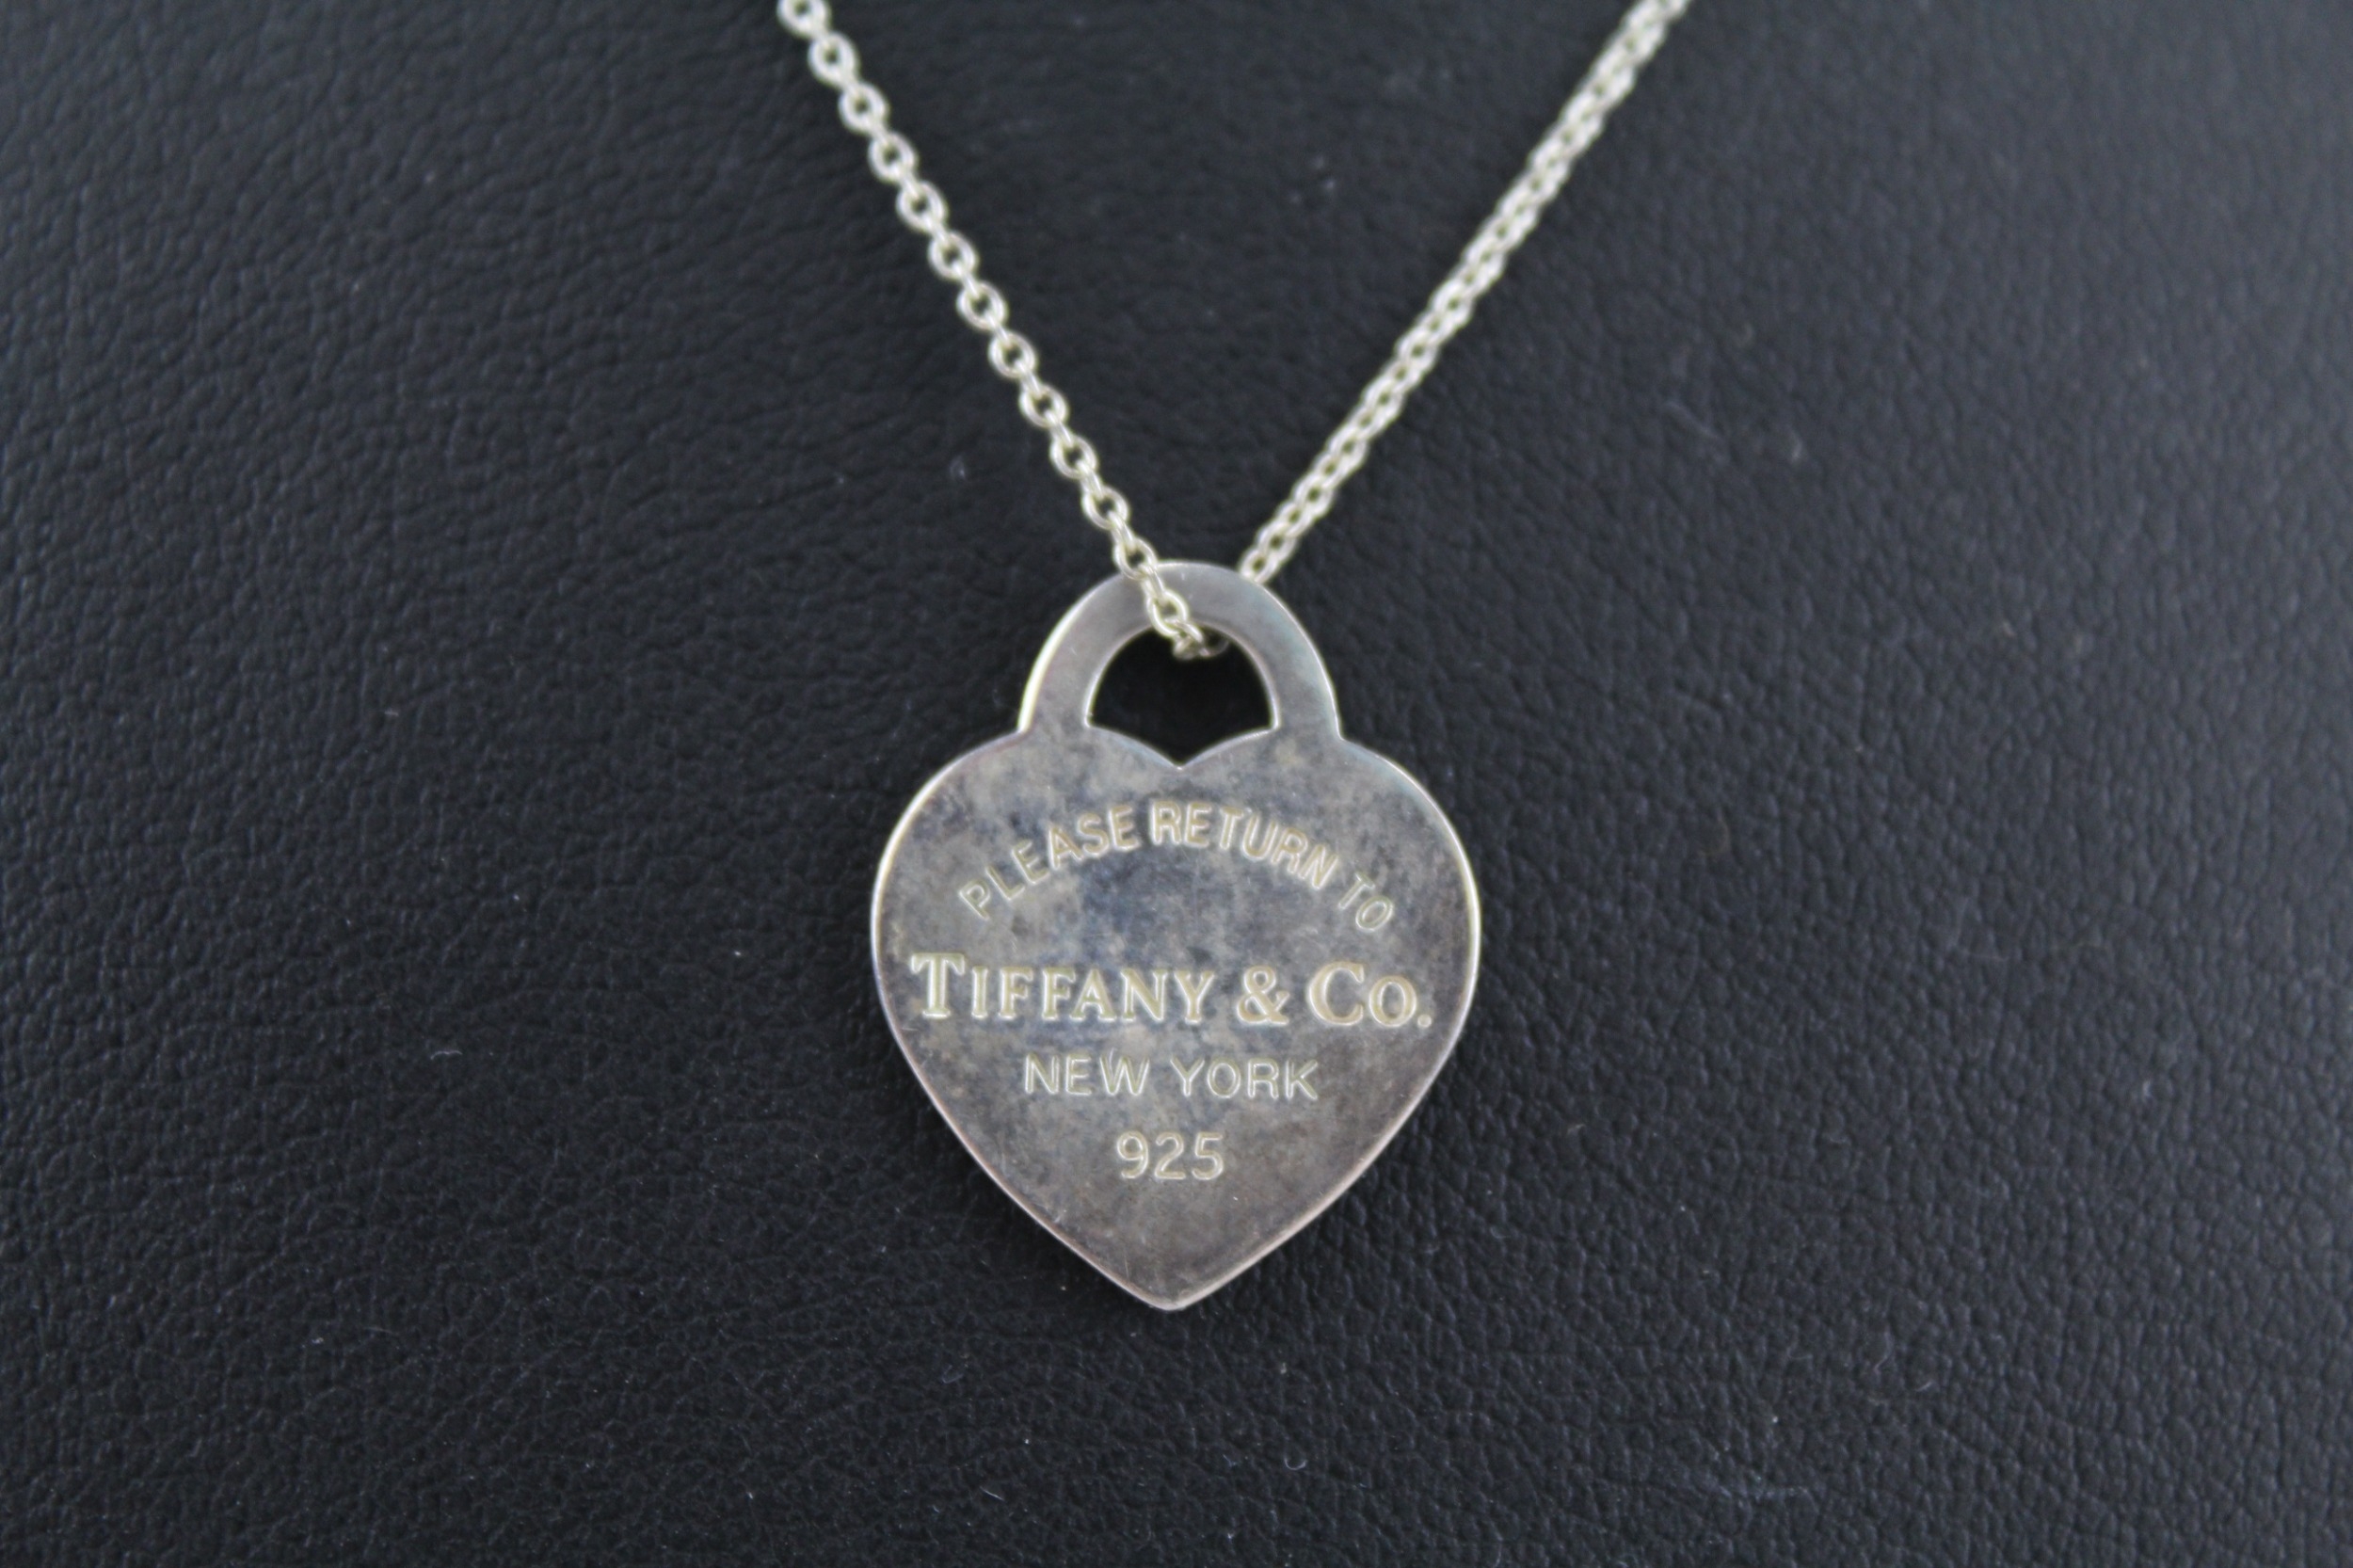 A silver heart pendant necklace by Tiffany and Co (4g) - Image 2 of 5